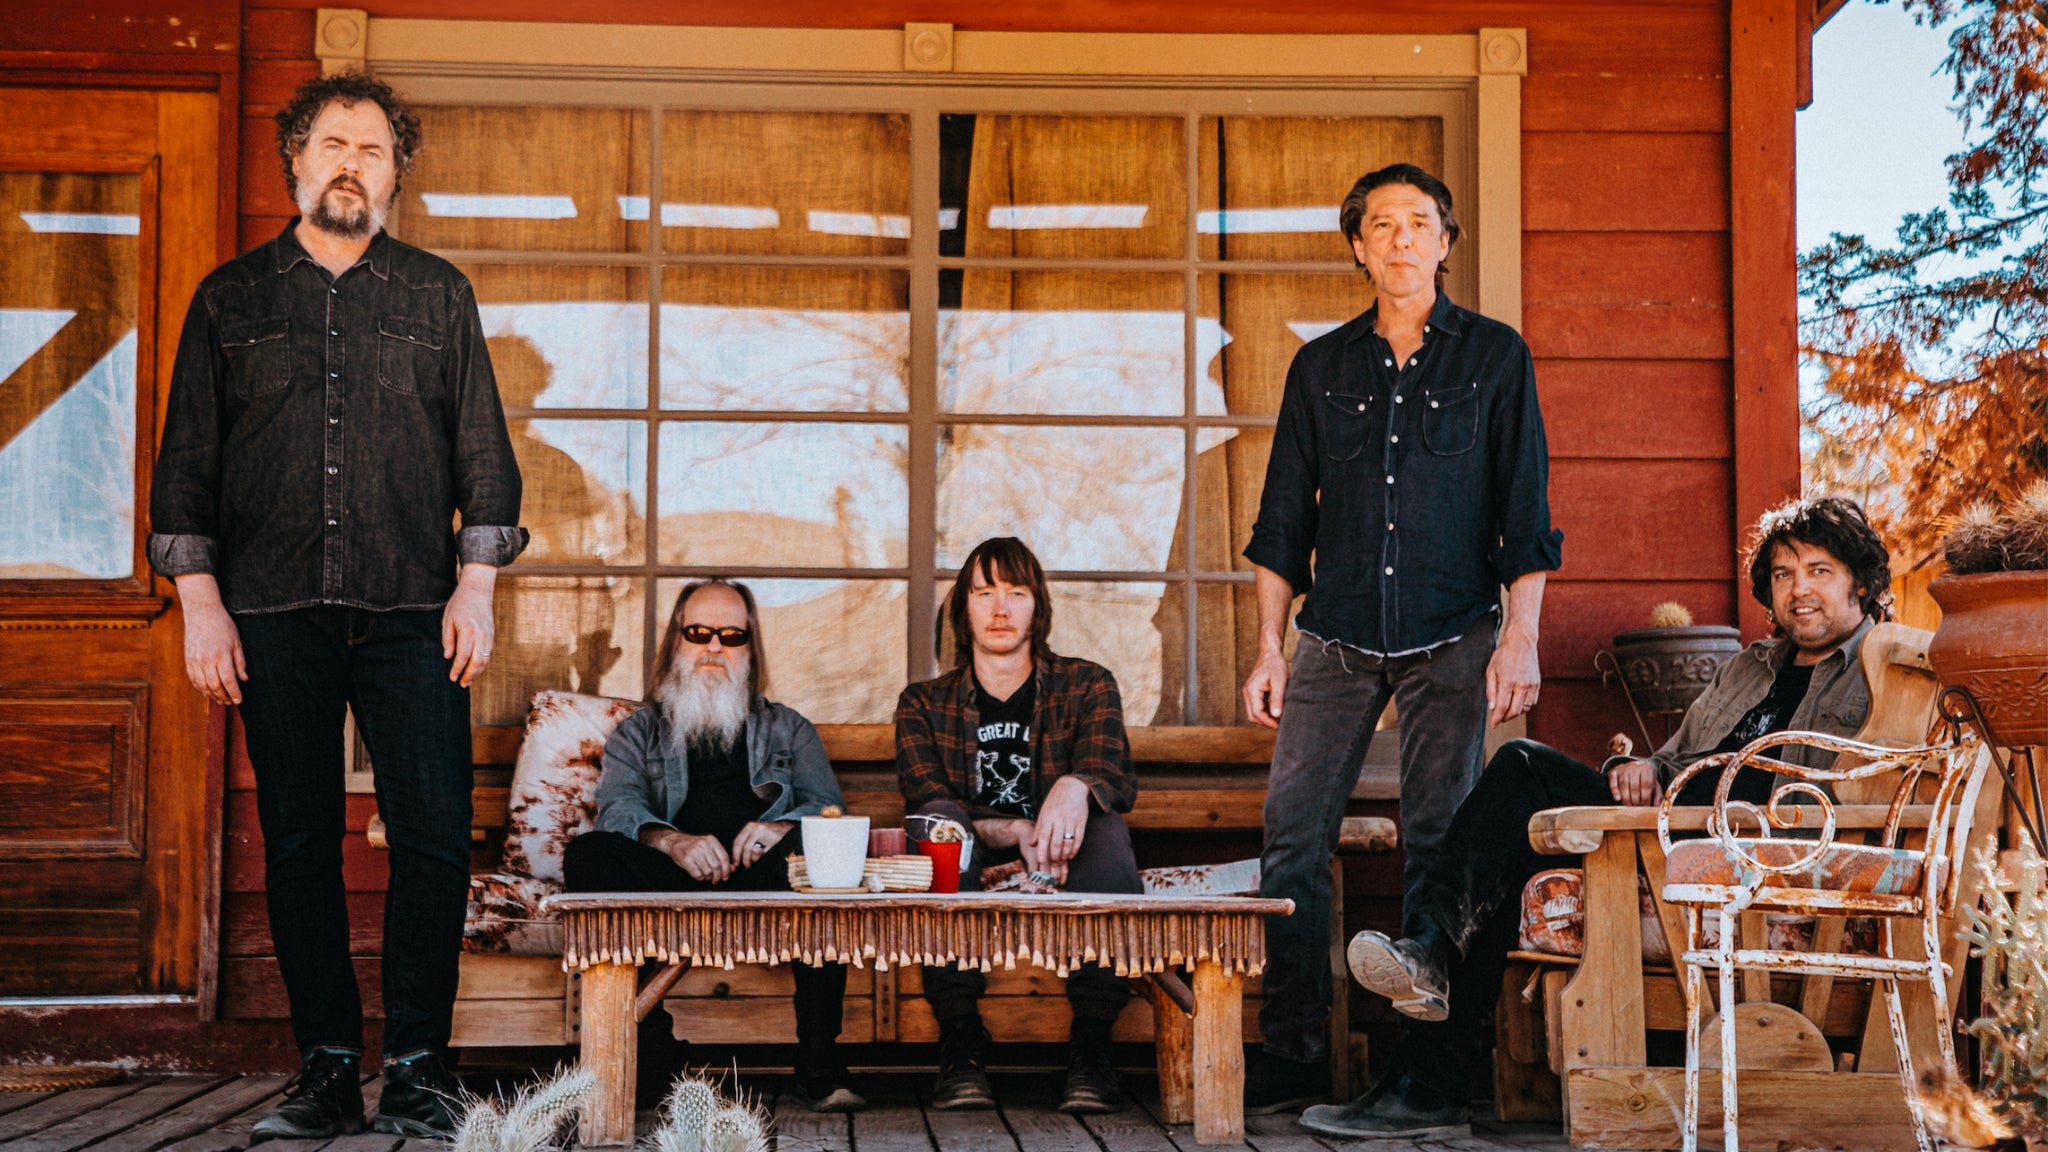 Drive-By Truckers - Southern Rock Opera Revisited 2024 pres. by WFPK